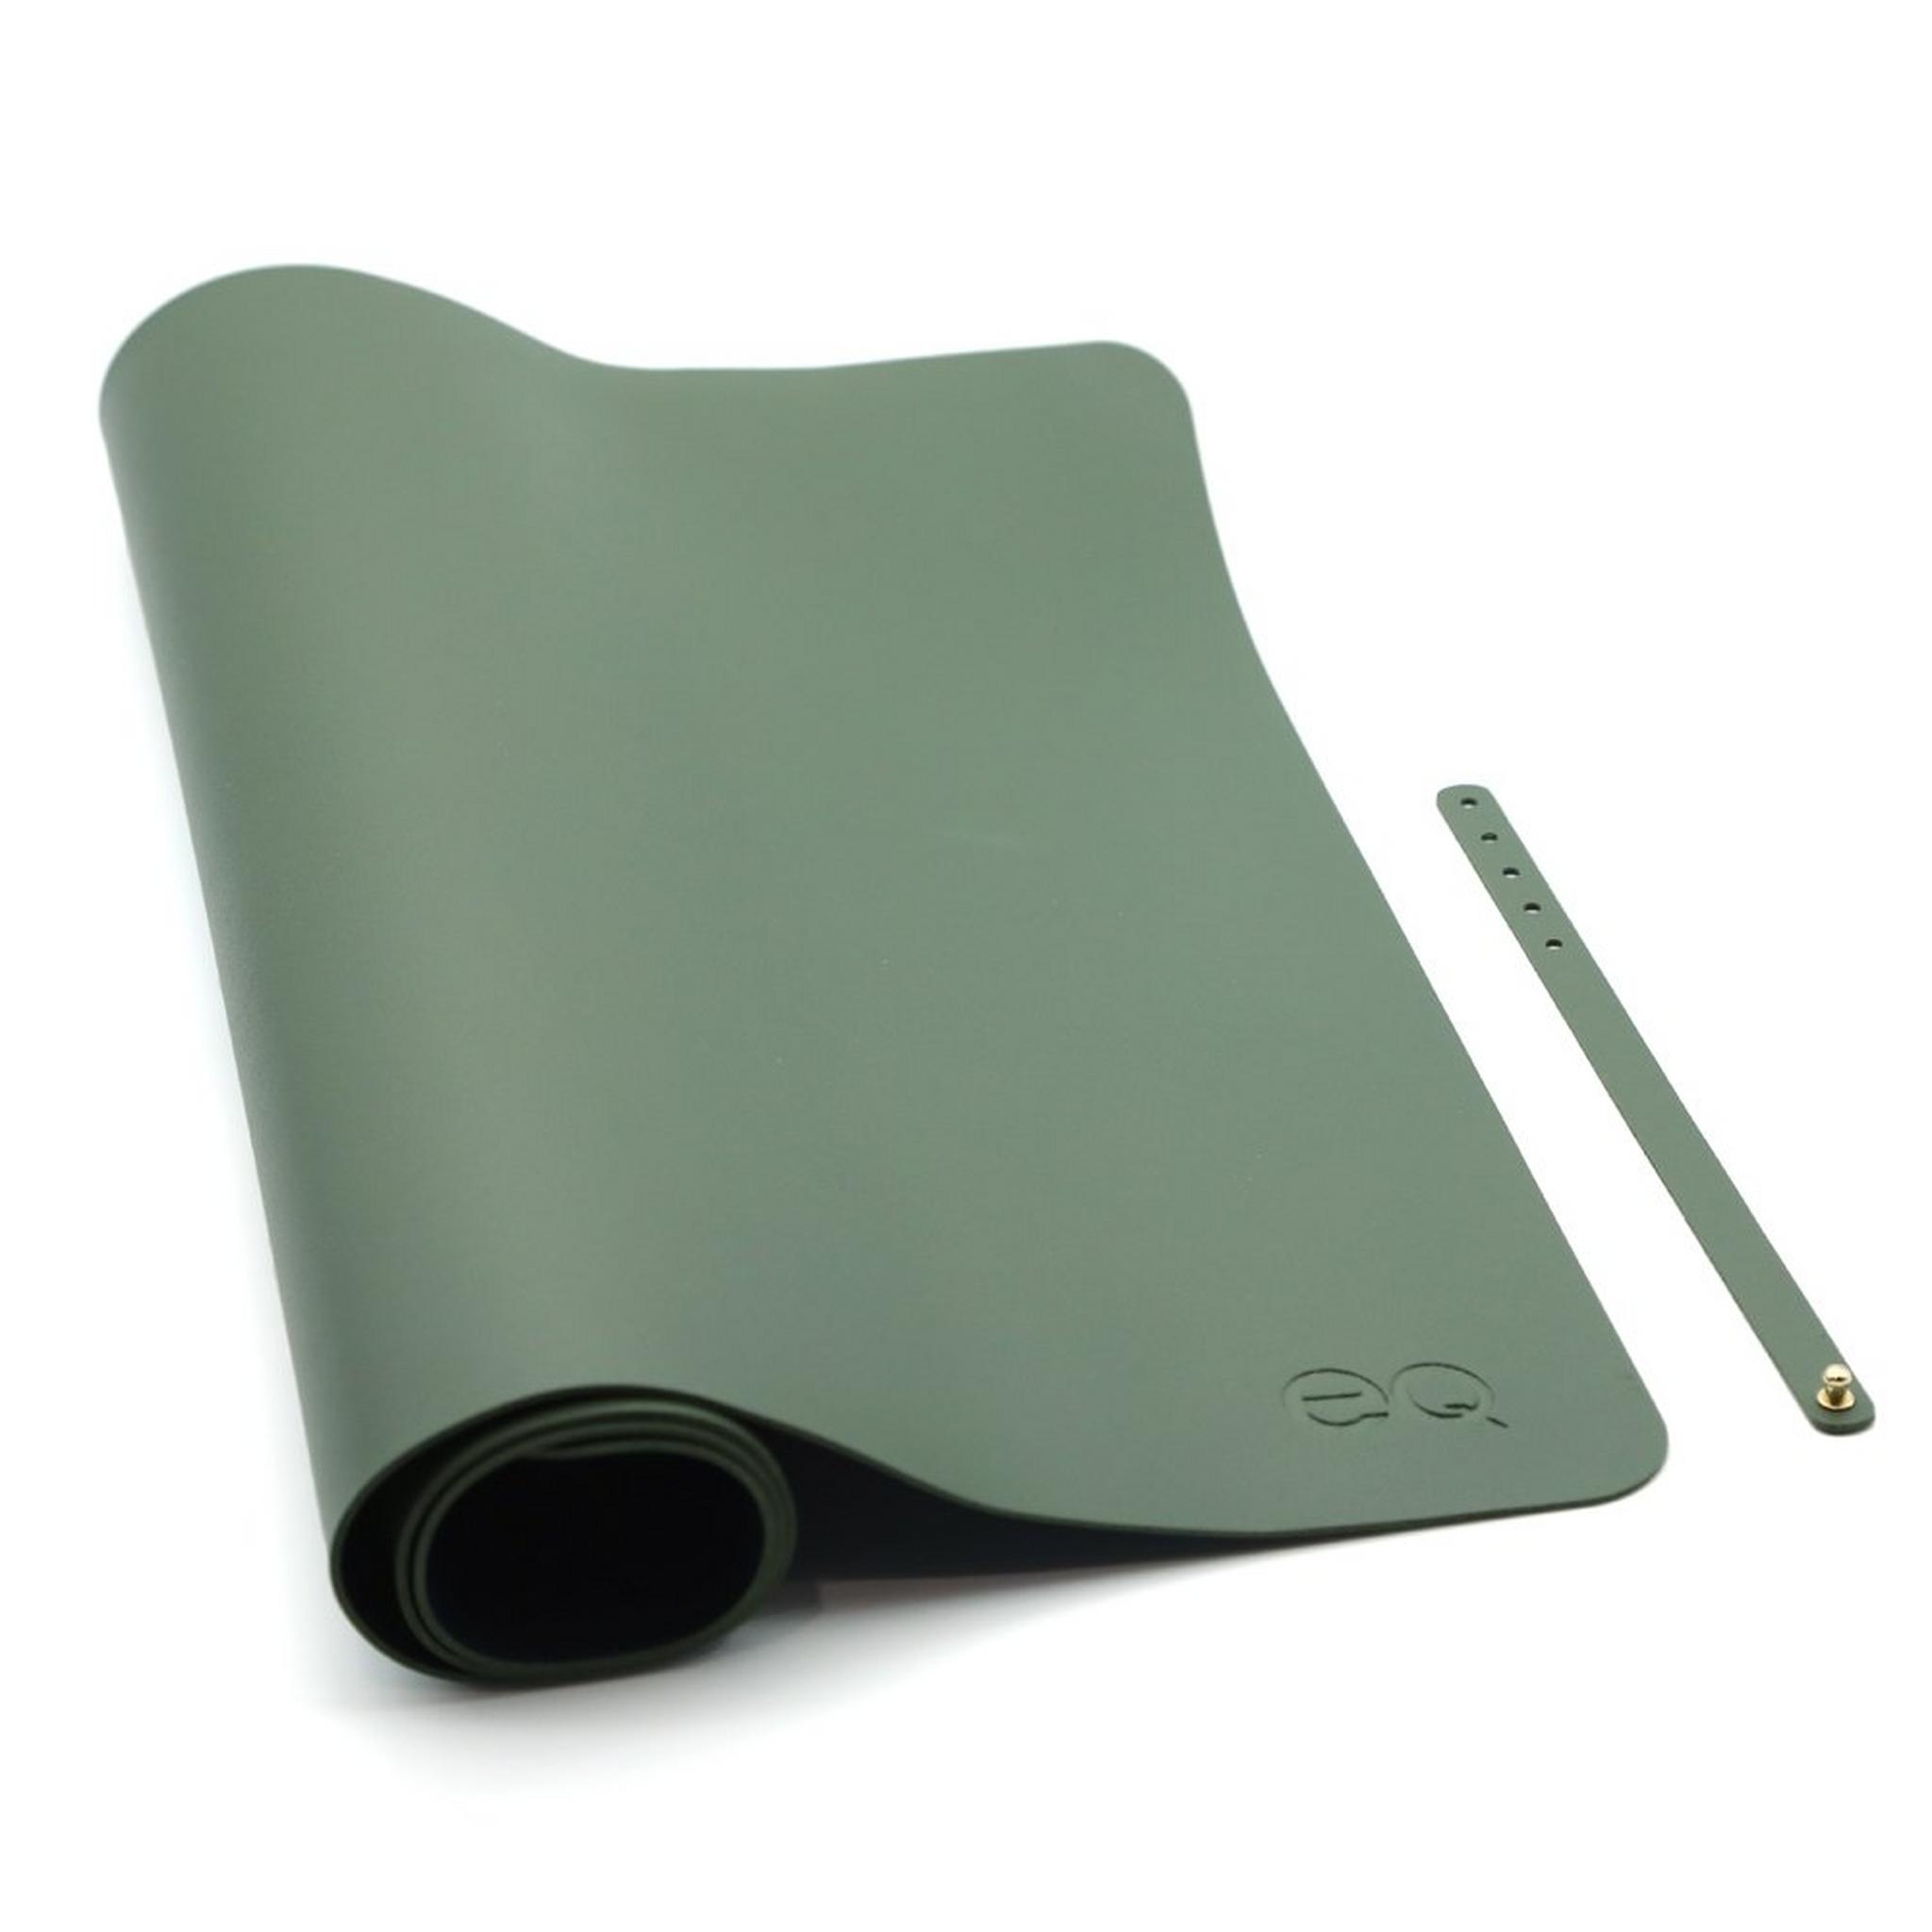 EQ Water-Proof Mouse Pad - Emerald